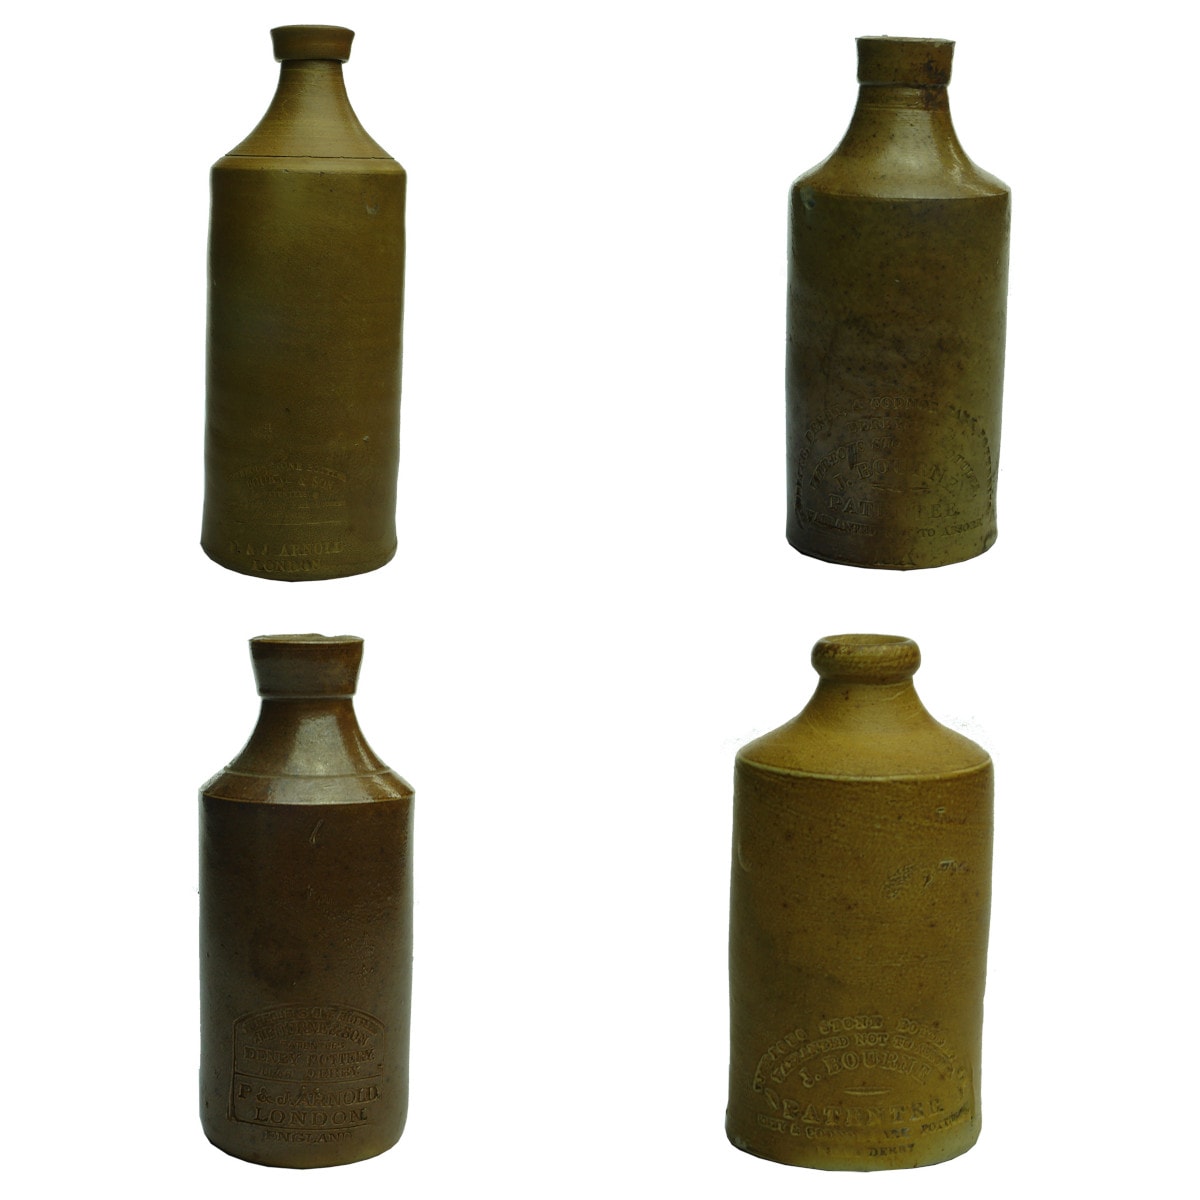 Four stoneware inks/bottles. All variations and combinations of J. Bourne, Patentee and P. & J. Arnold, London stamps.